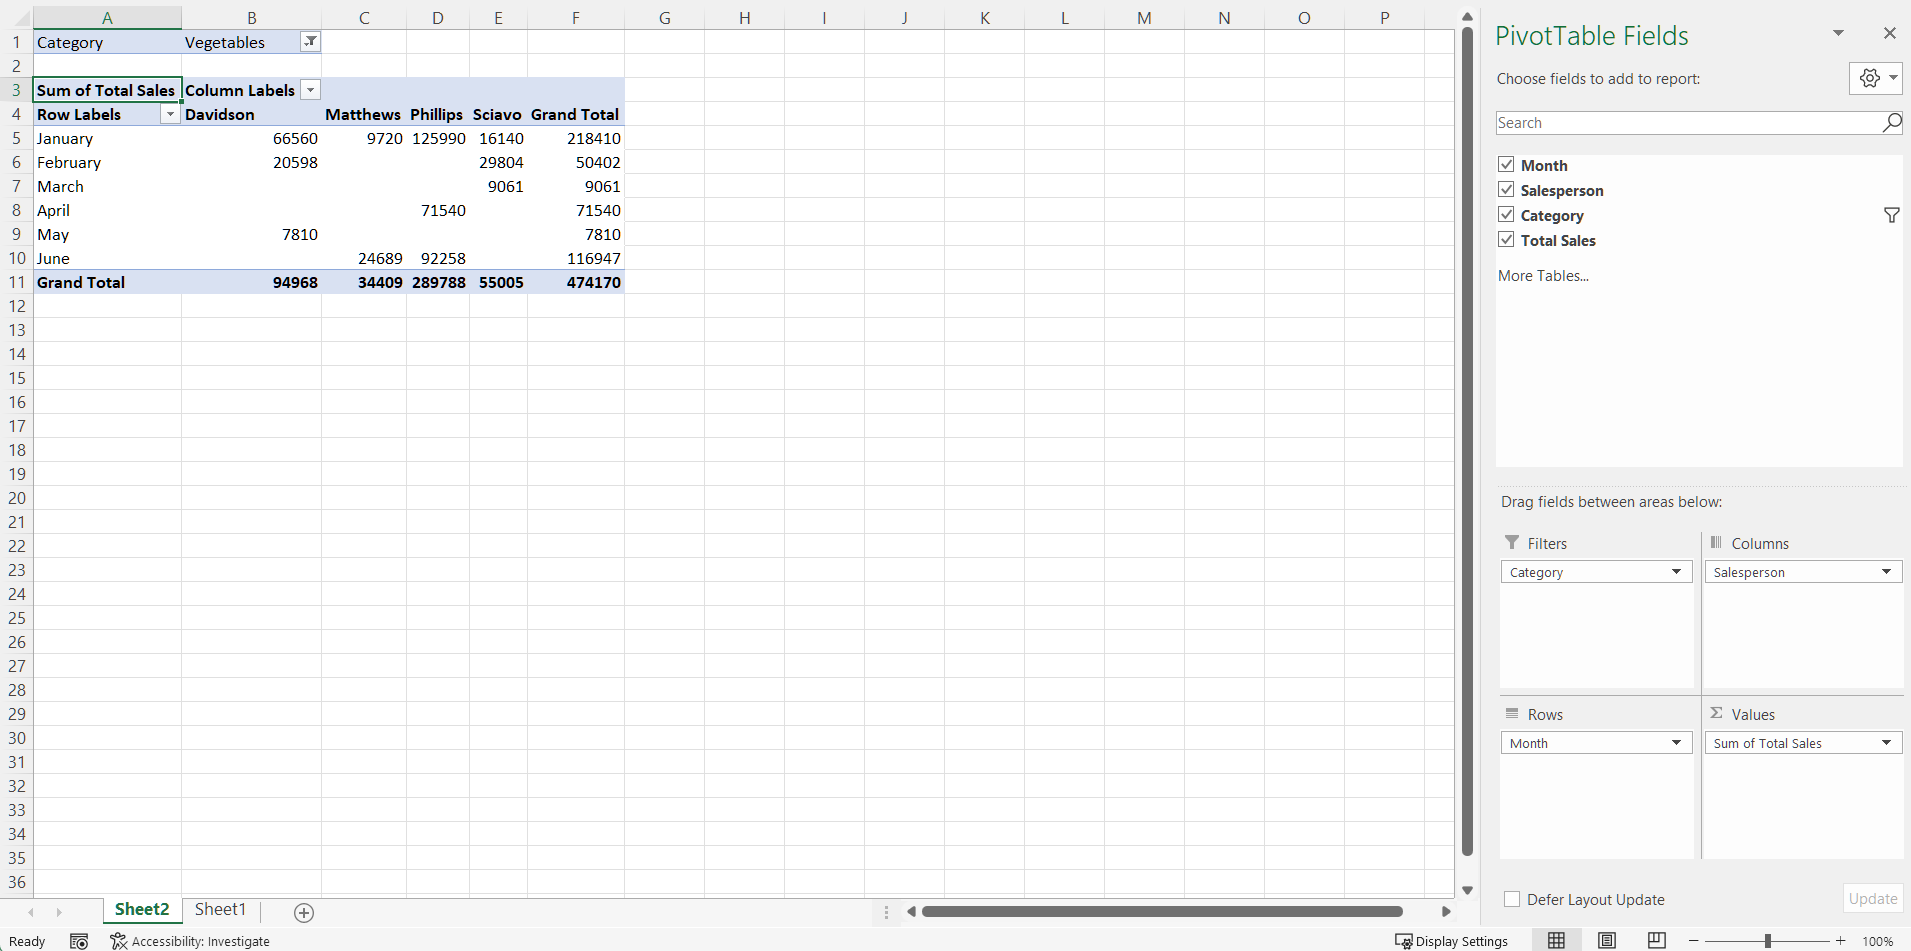 Pivot table with a filter